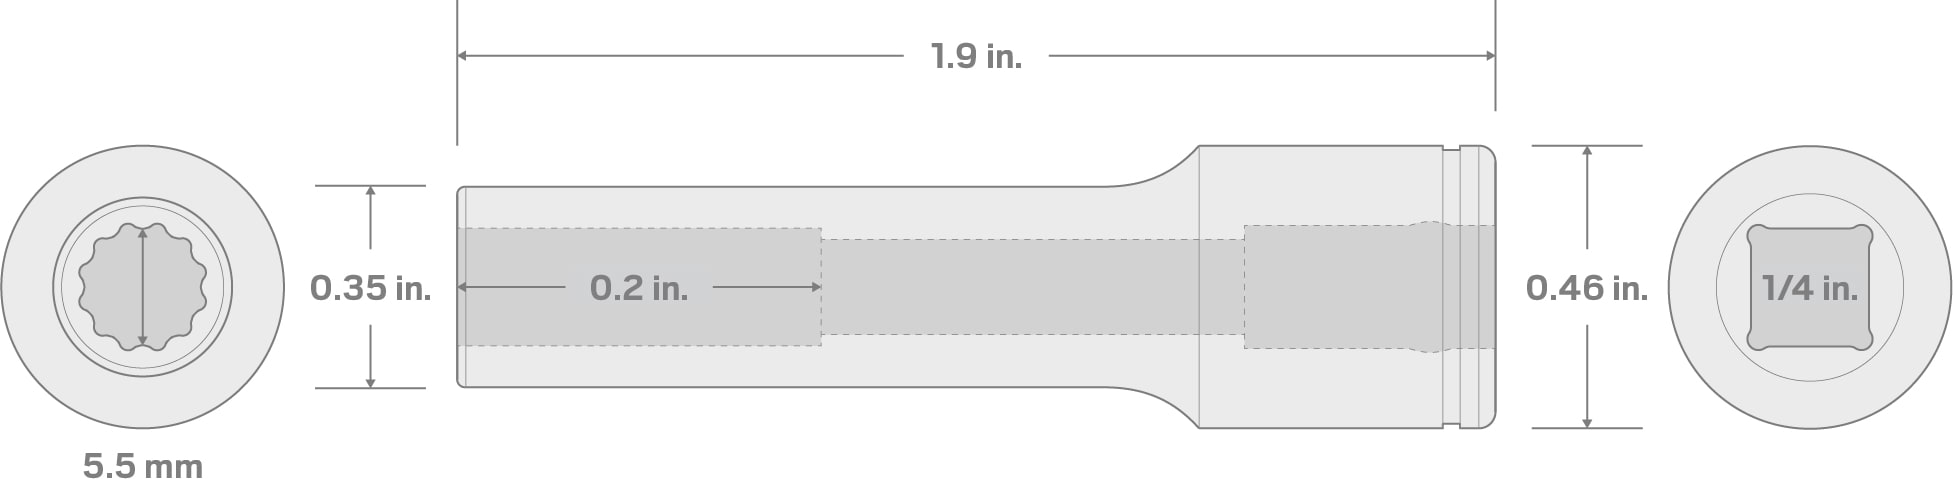 Specs for 1/4 Inch Drive x 5.5 mm Deep 12-Point Socket